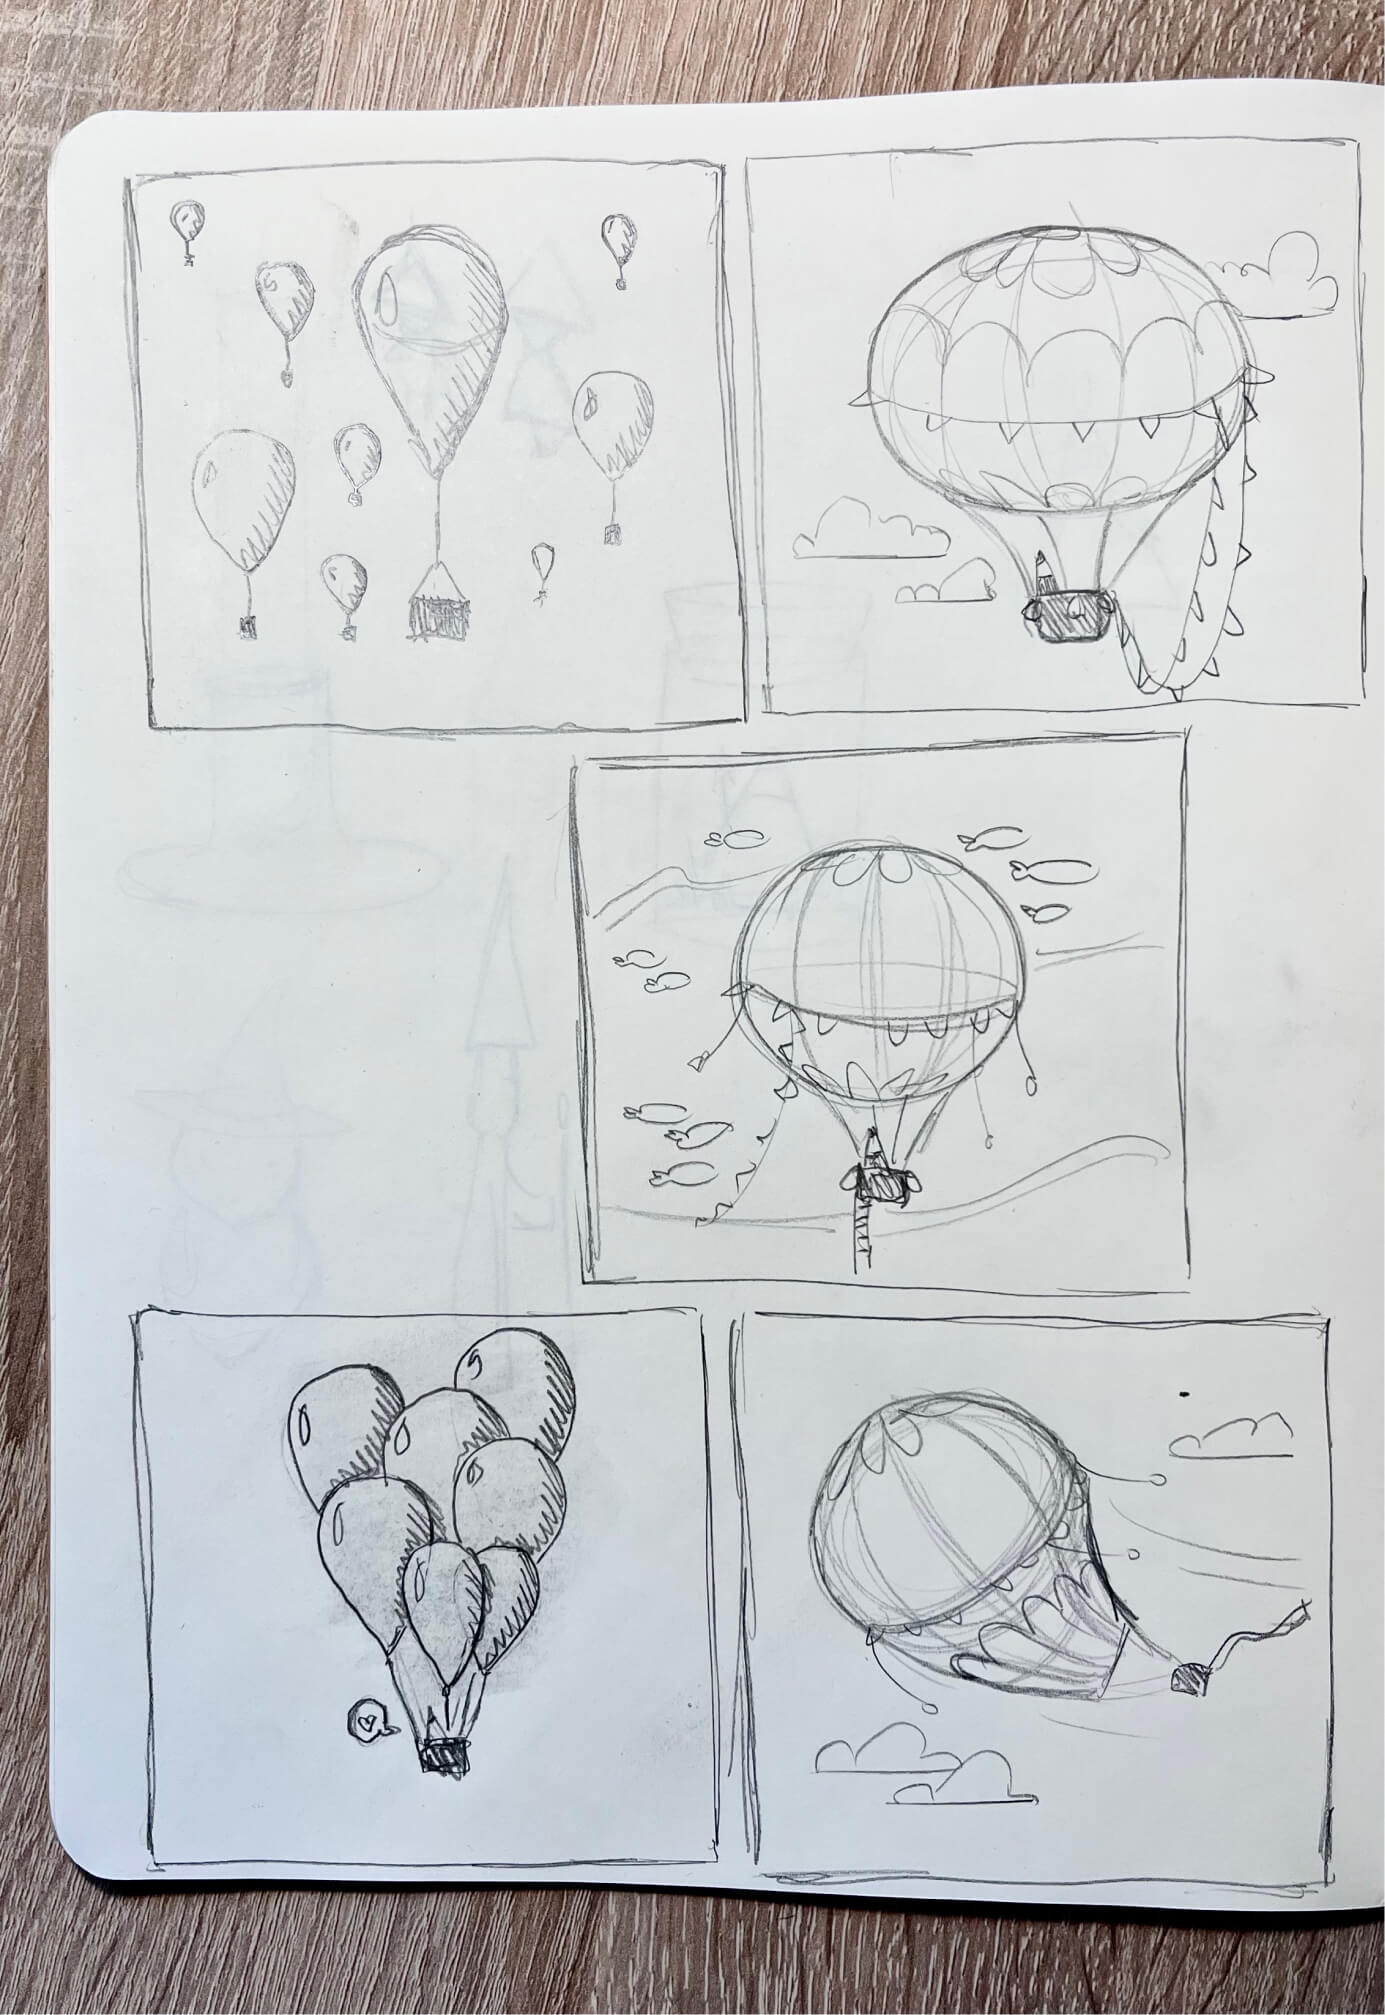 Page with drawn sketches of hot air balloons